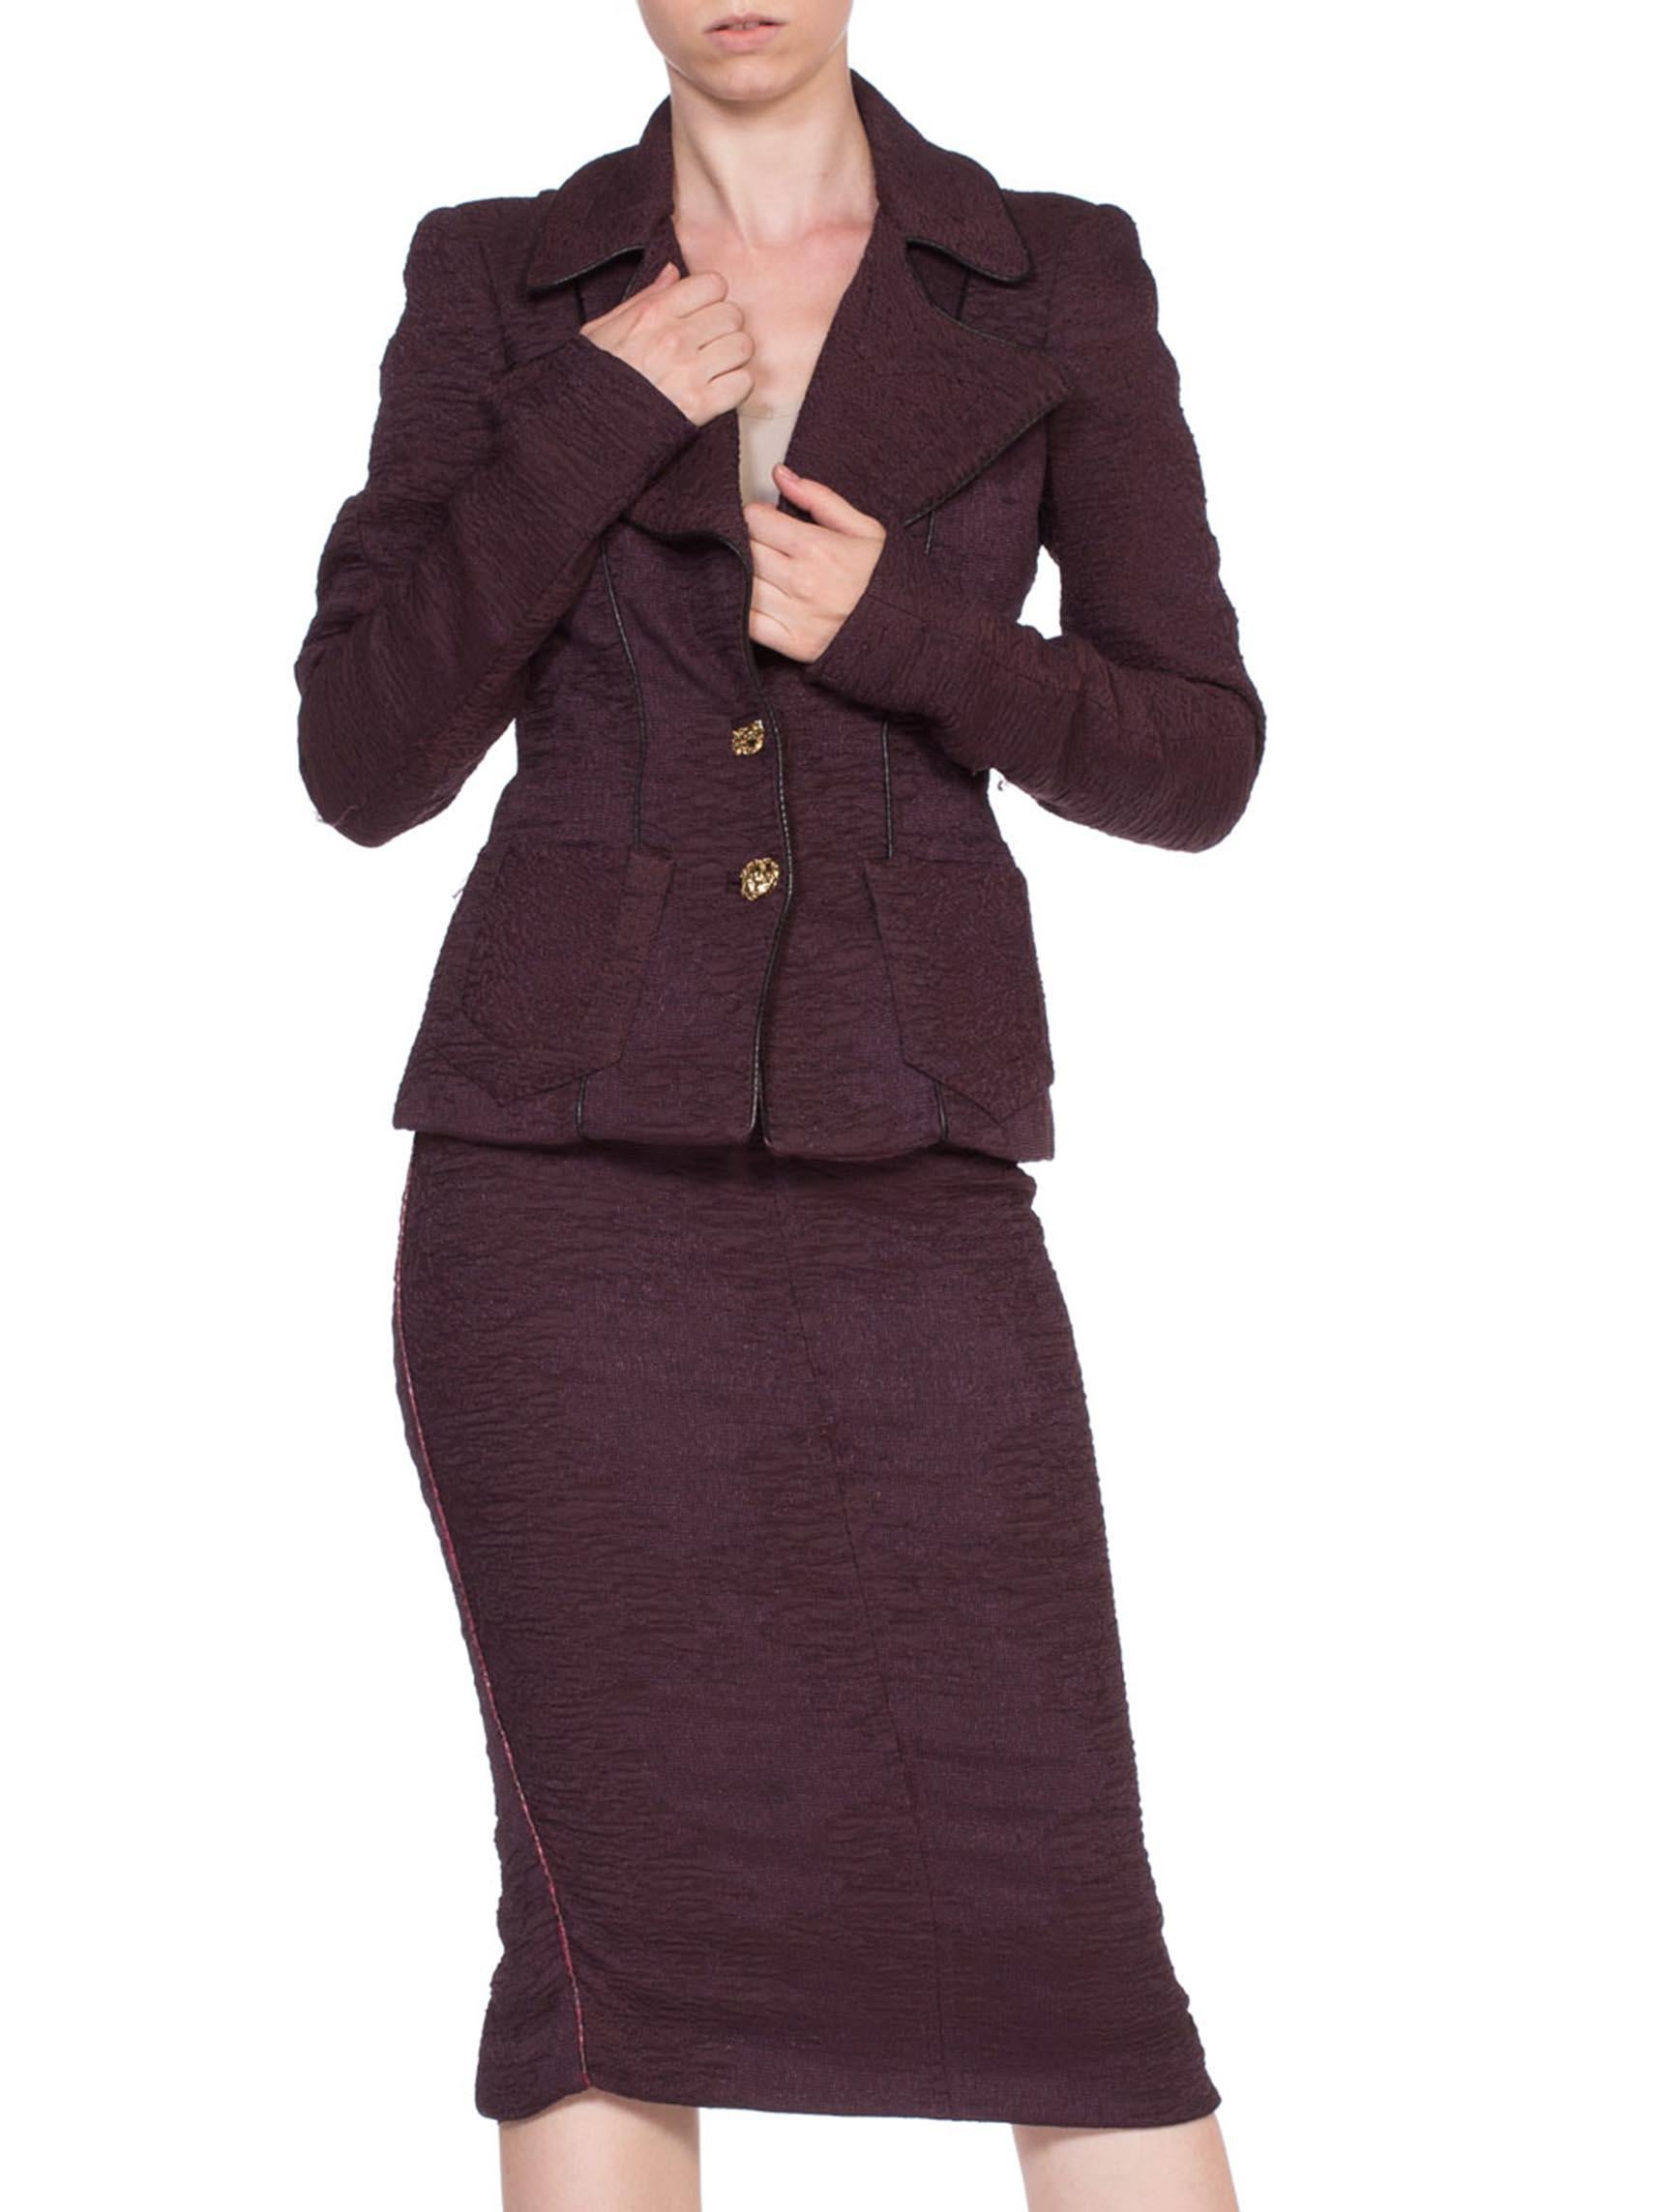 1990'S ROBERTO CAVALLI Plum Purple Skirt Suit In Excellent Condition For Sale In New York, NY